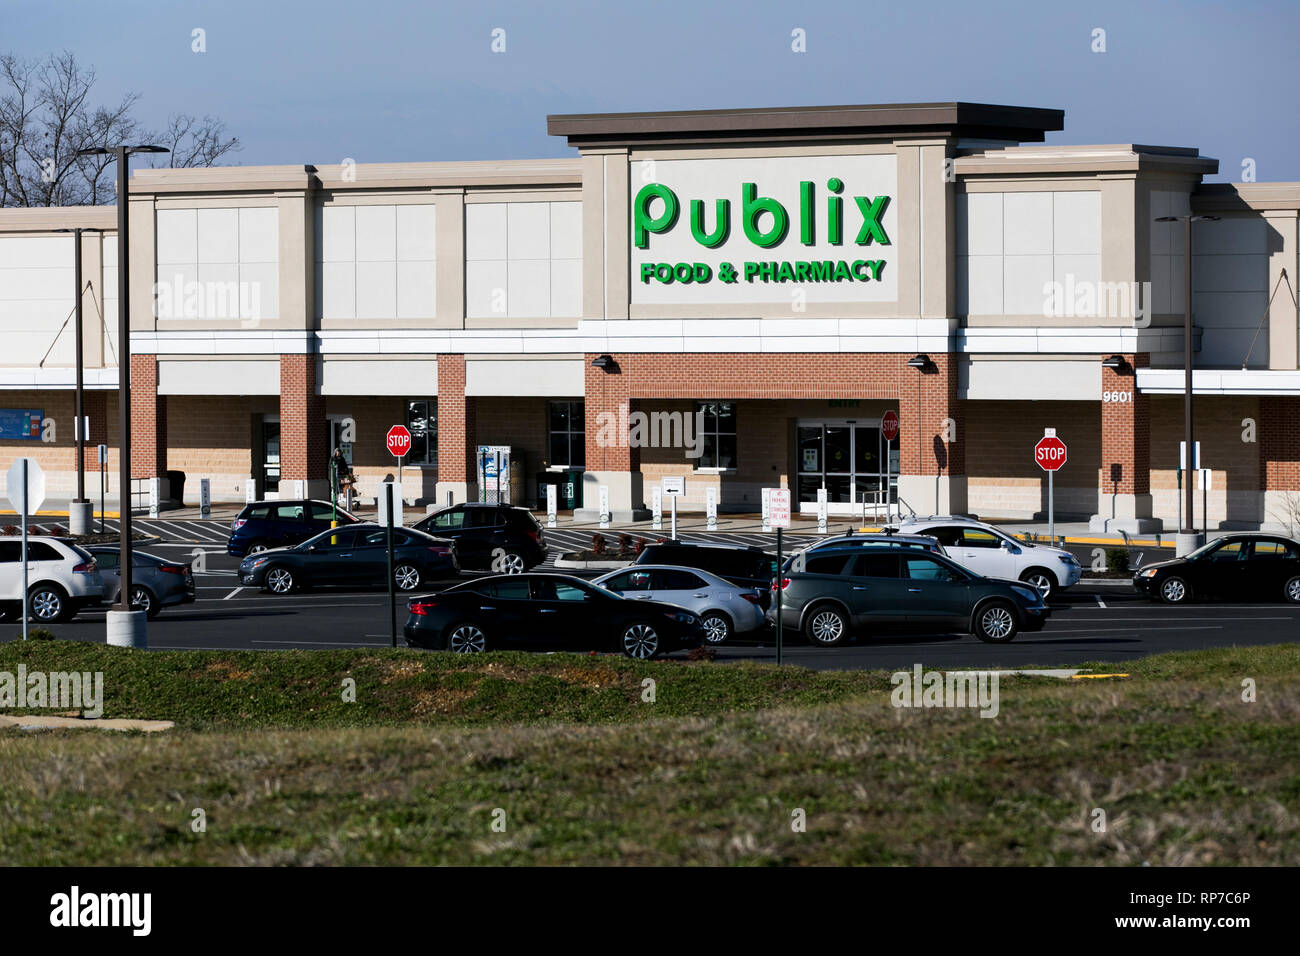 Publix Grocery Store High Resolution Stock Photography And Images - Alamy